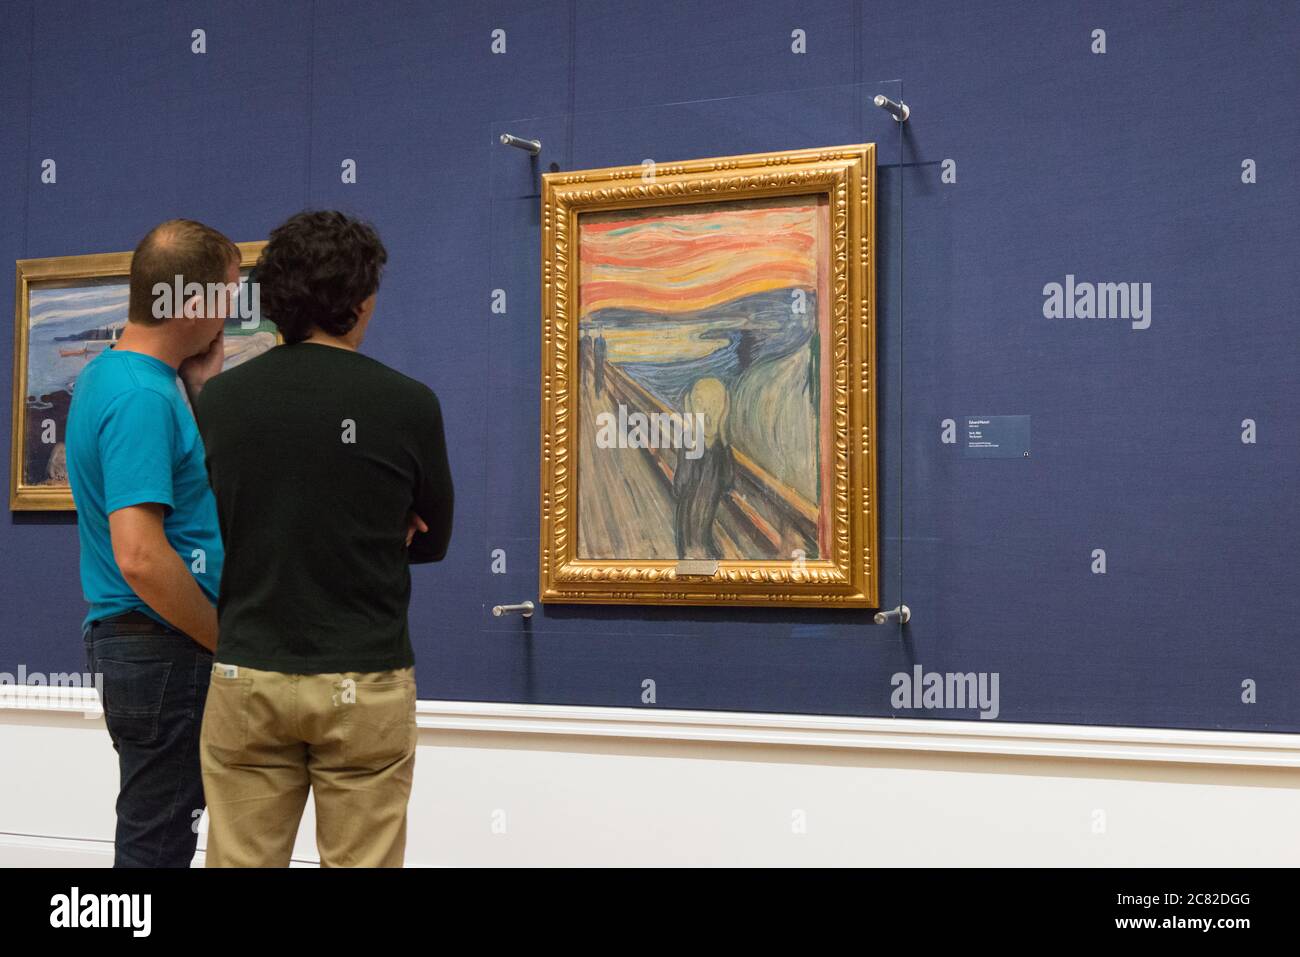 Edvard Munch's The Scream on display at the National Gallery in Oslo, Norway Stock Photo